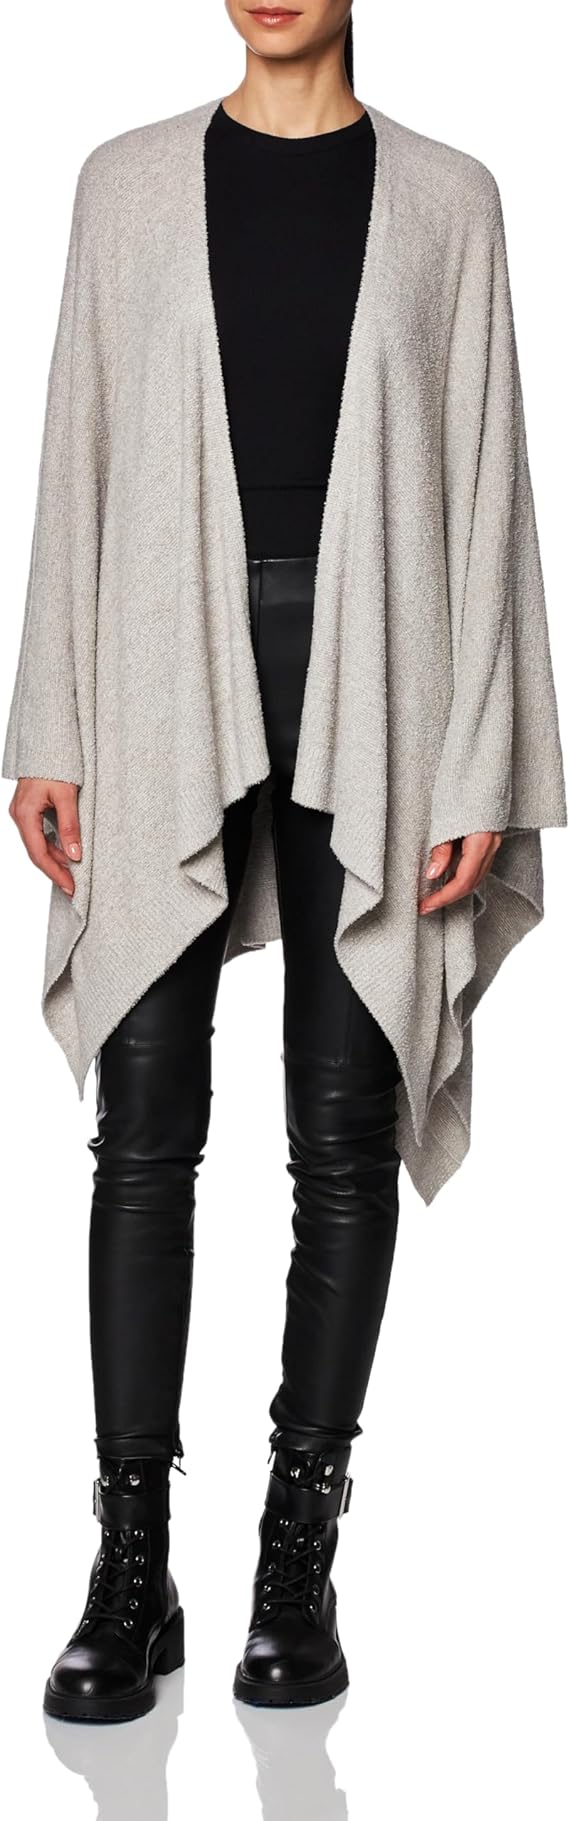 Barefoot Dreams Bamboo Chic Lite Weekend Wrap – Heathered Pewter/Pearl